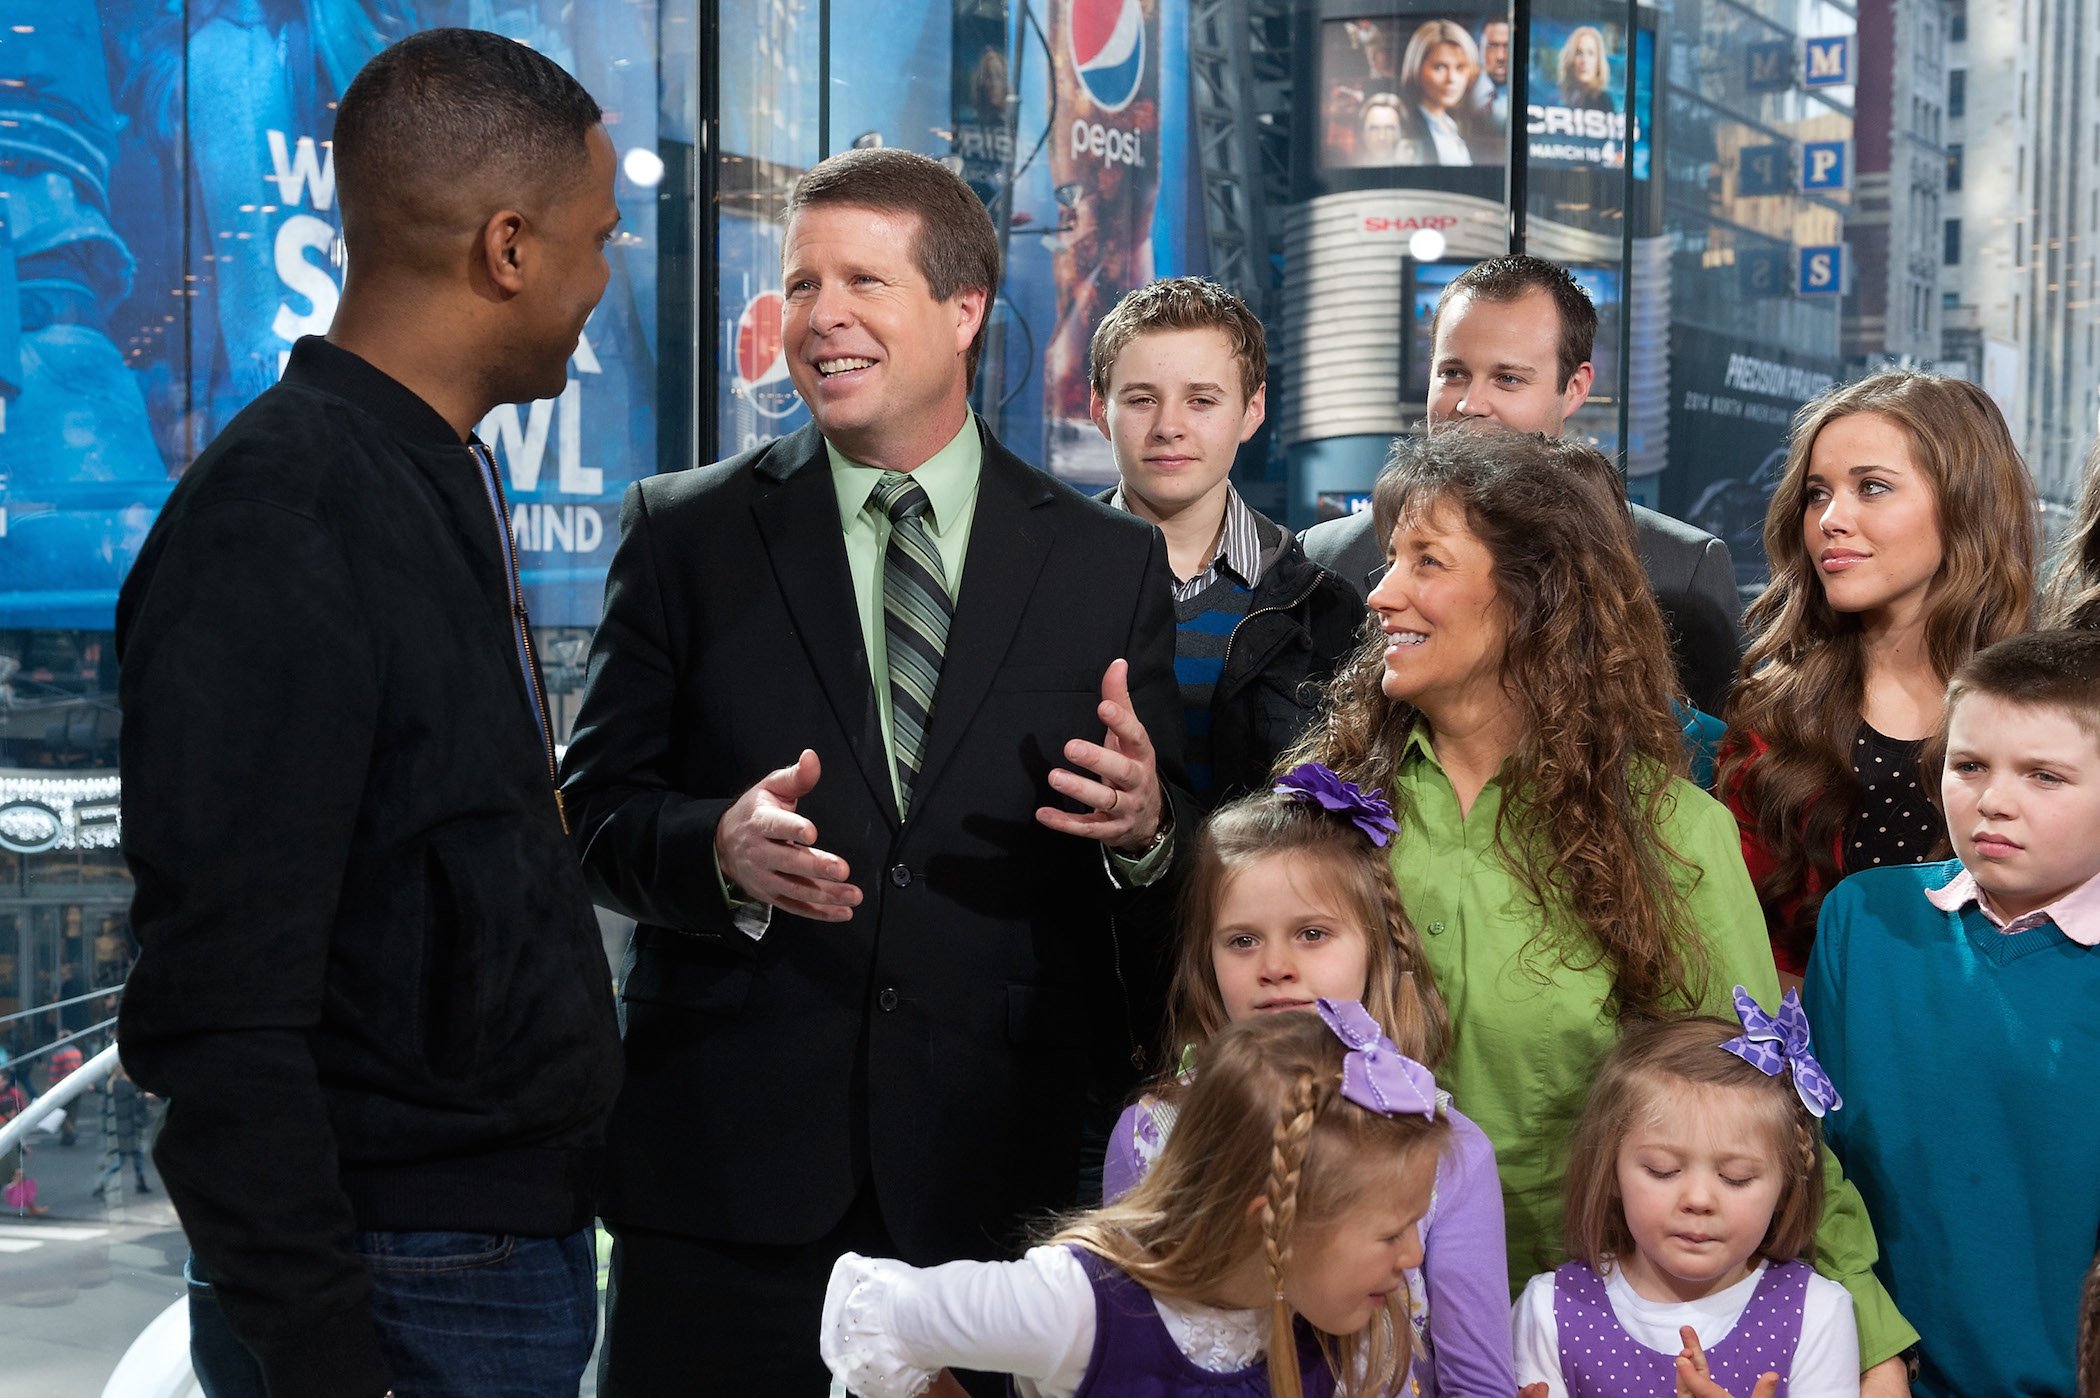 AJ Calloway (L) interviews the Duggar family from TLC's 'Counting On'